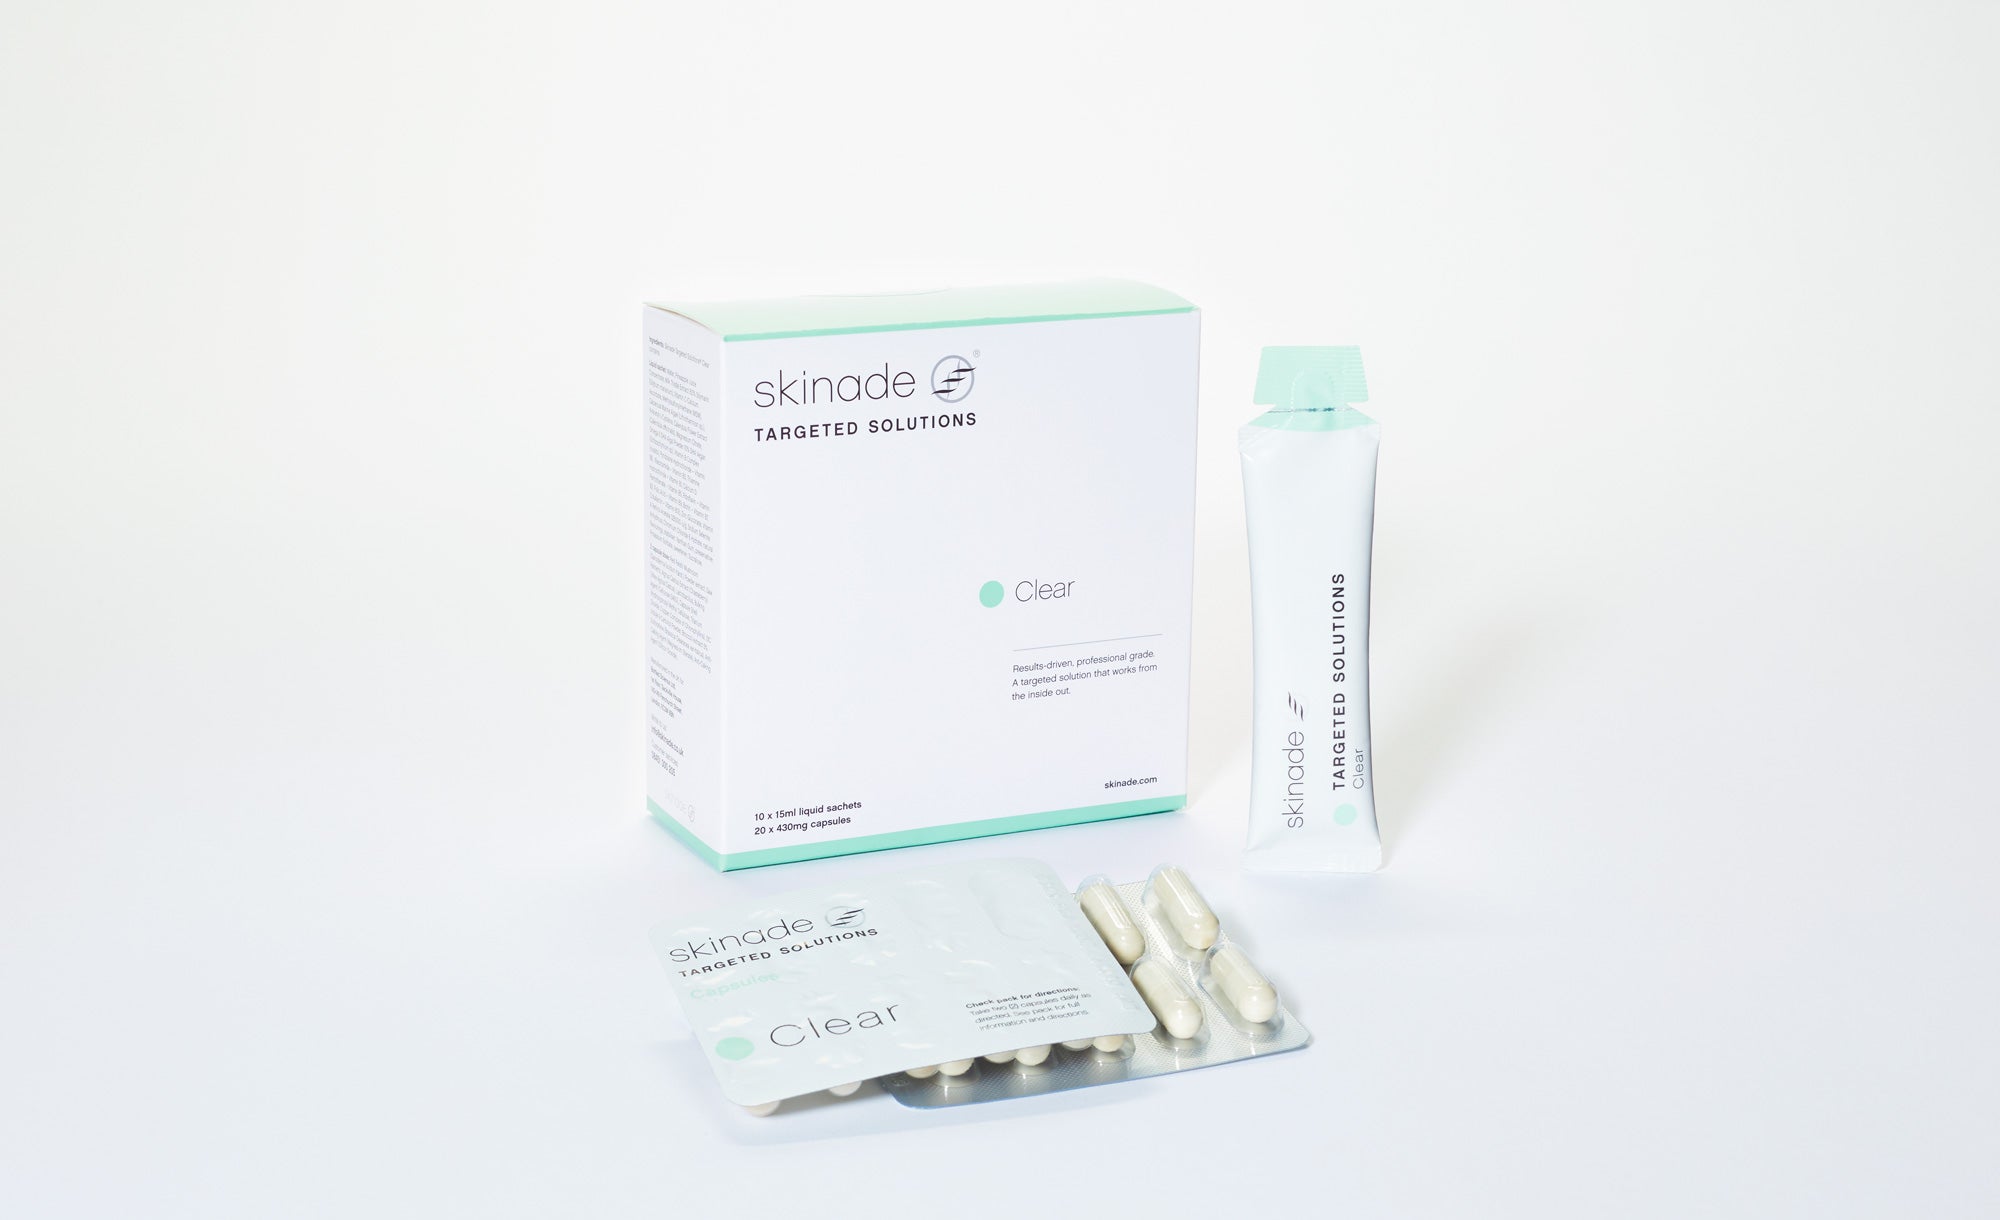 SKINADE Targeted Solutions - Clear